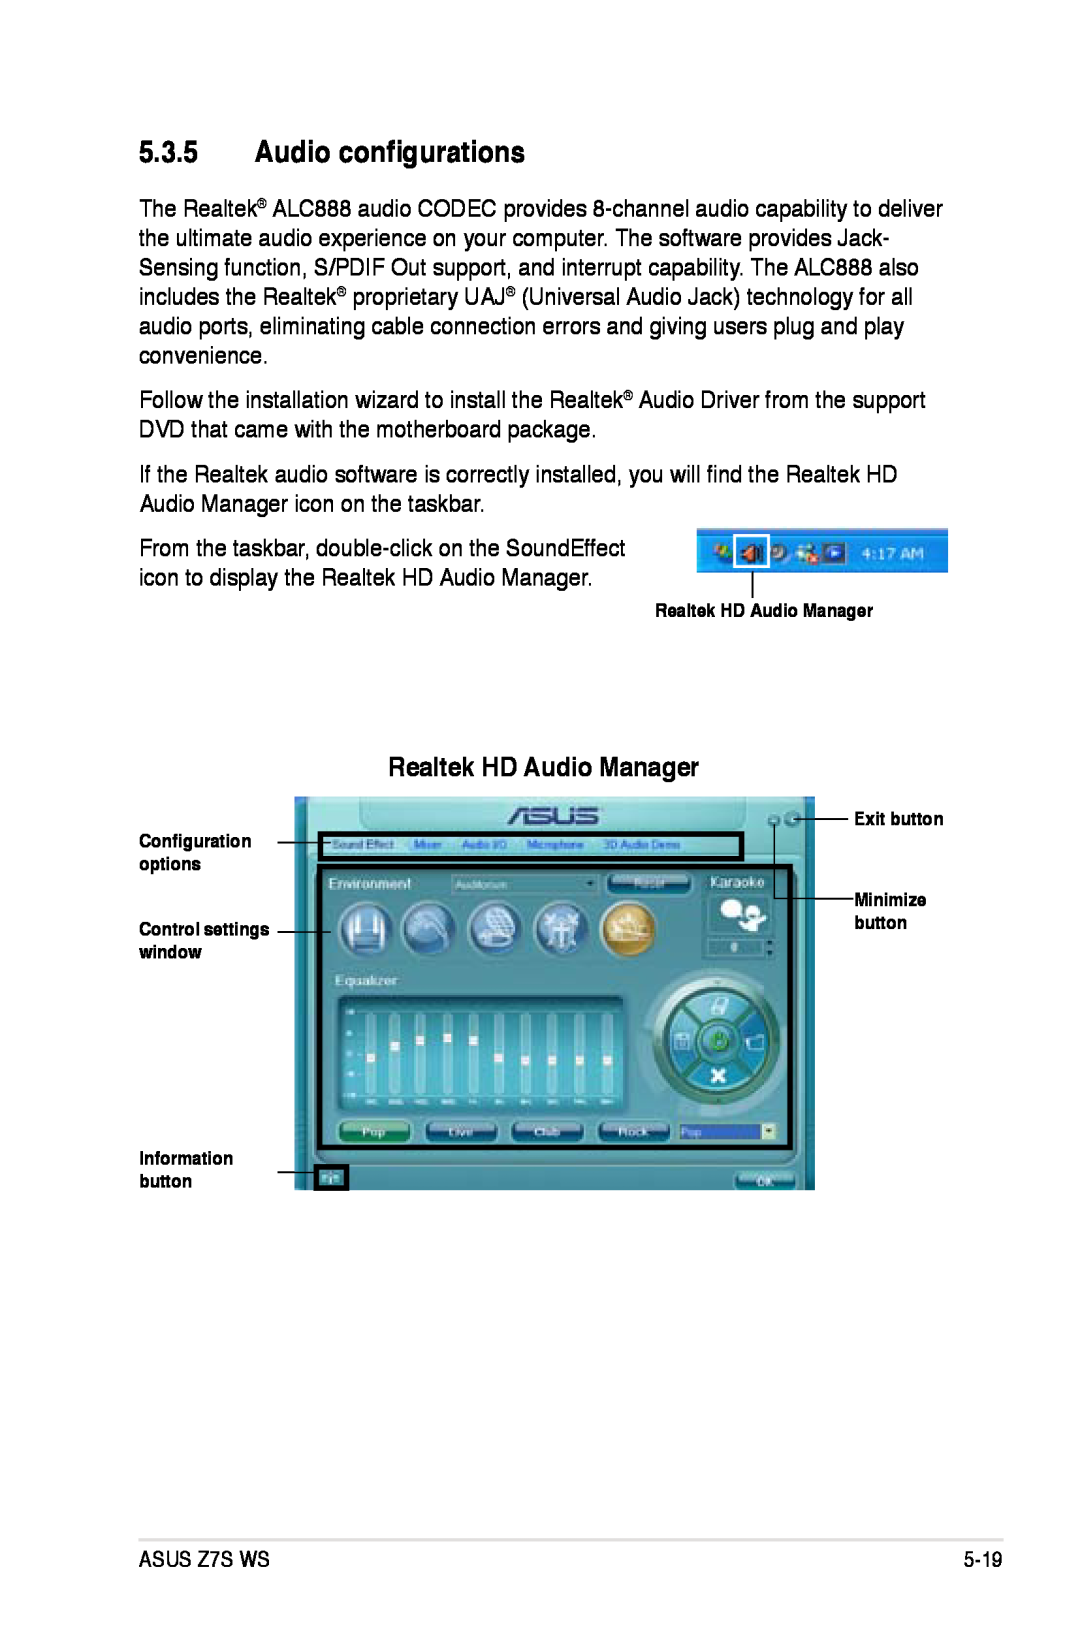 Asus Z7S WS manual Audio configurations, Realtek HD Audio Manager 